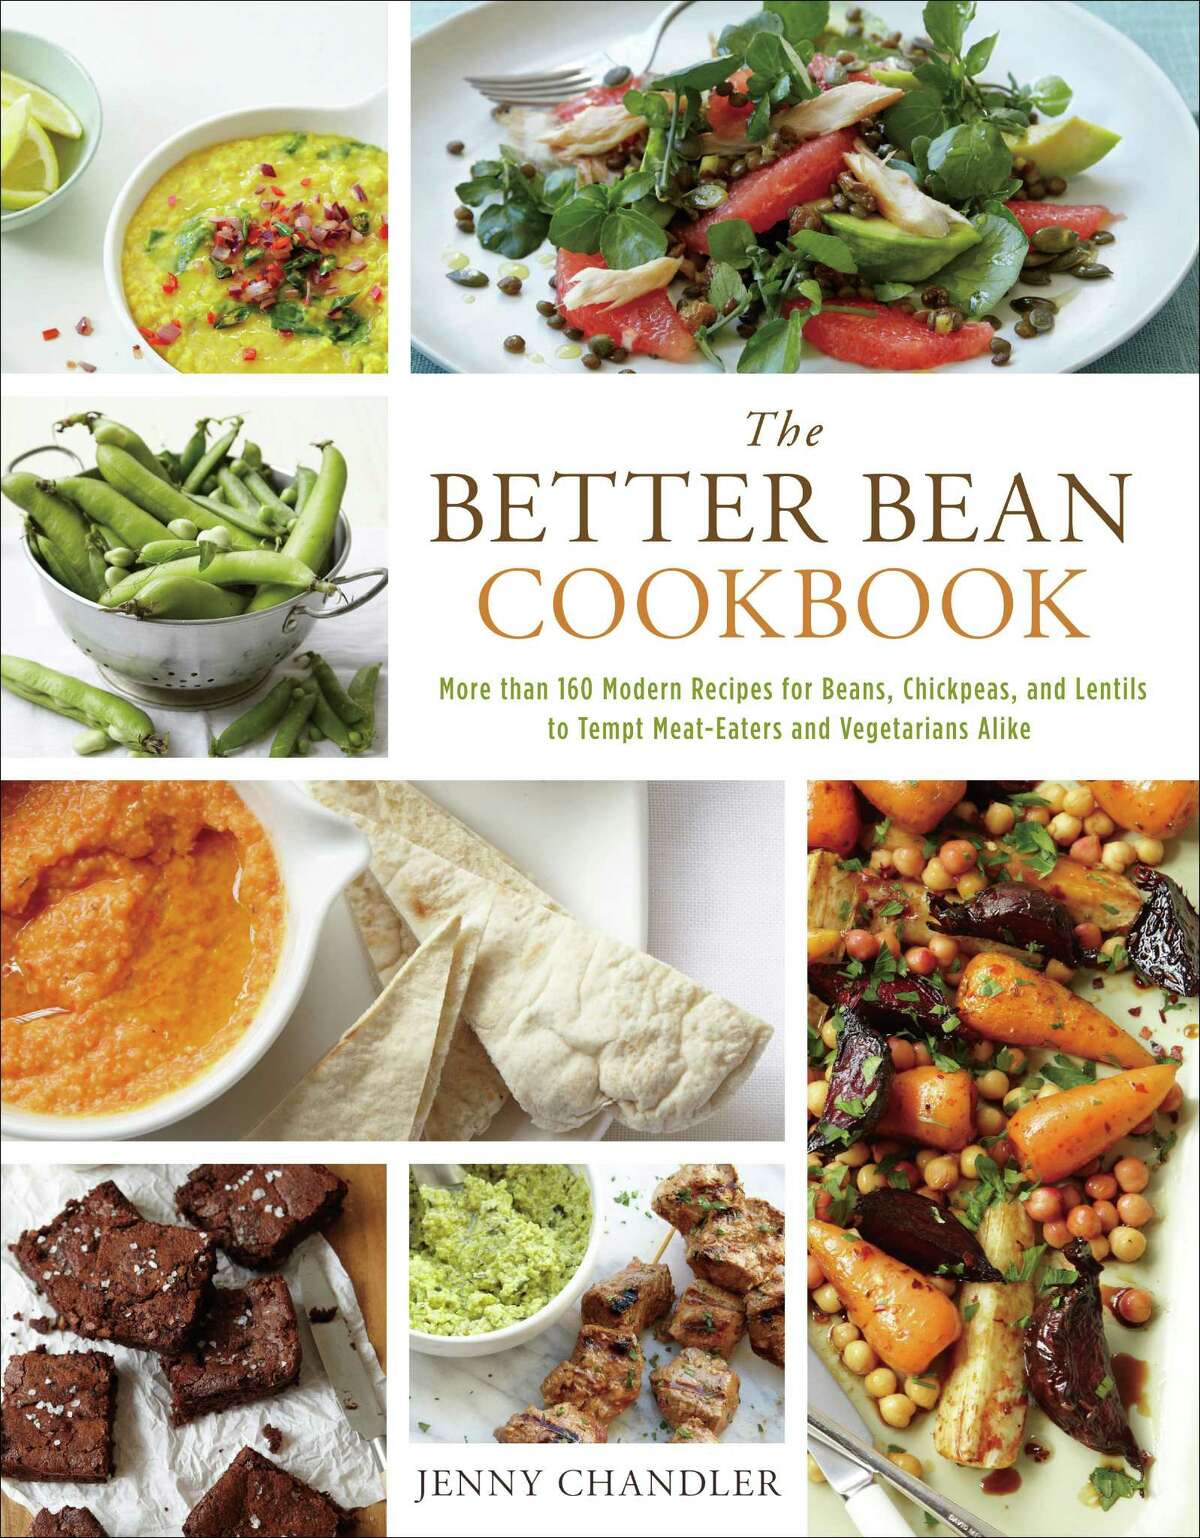 Reprinted with permission from The Better Bean Cookbook Â 2014 by Sterling Epicure, an imprint of Sterling Publishing Co., Inc.